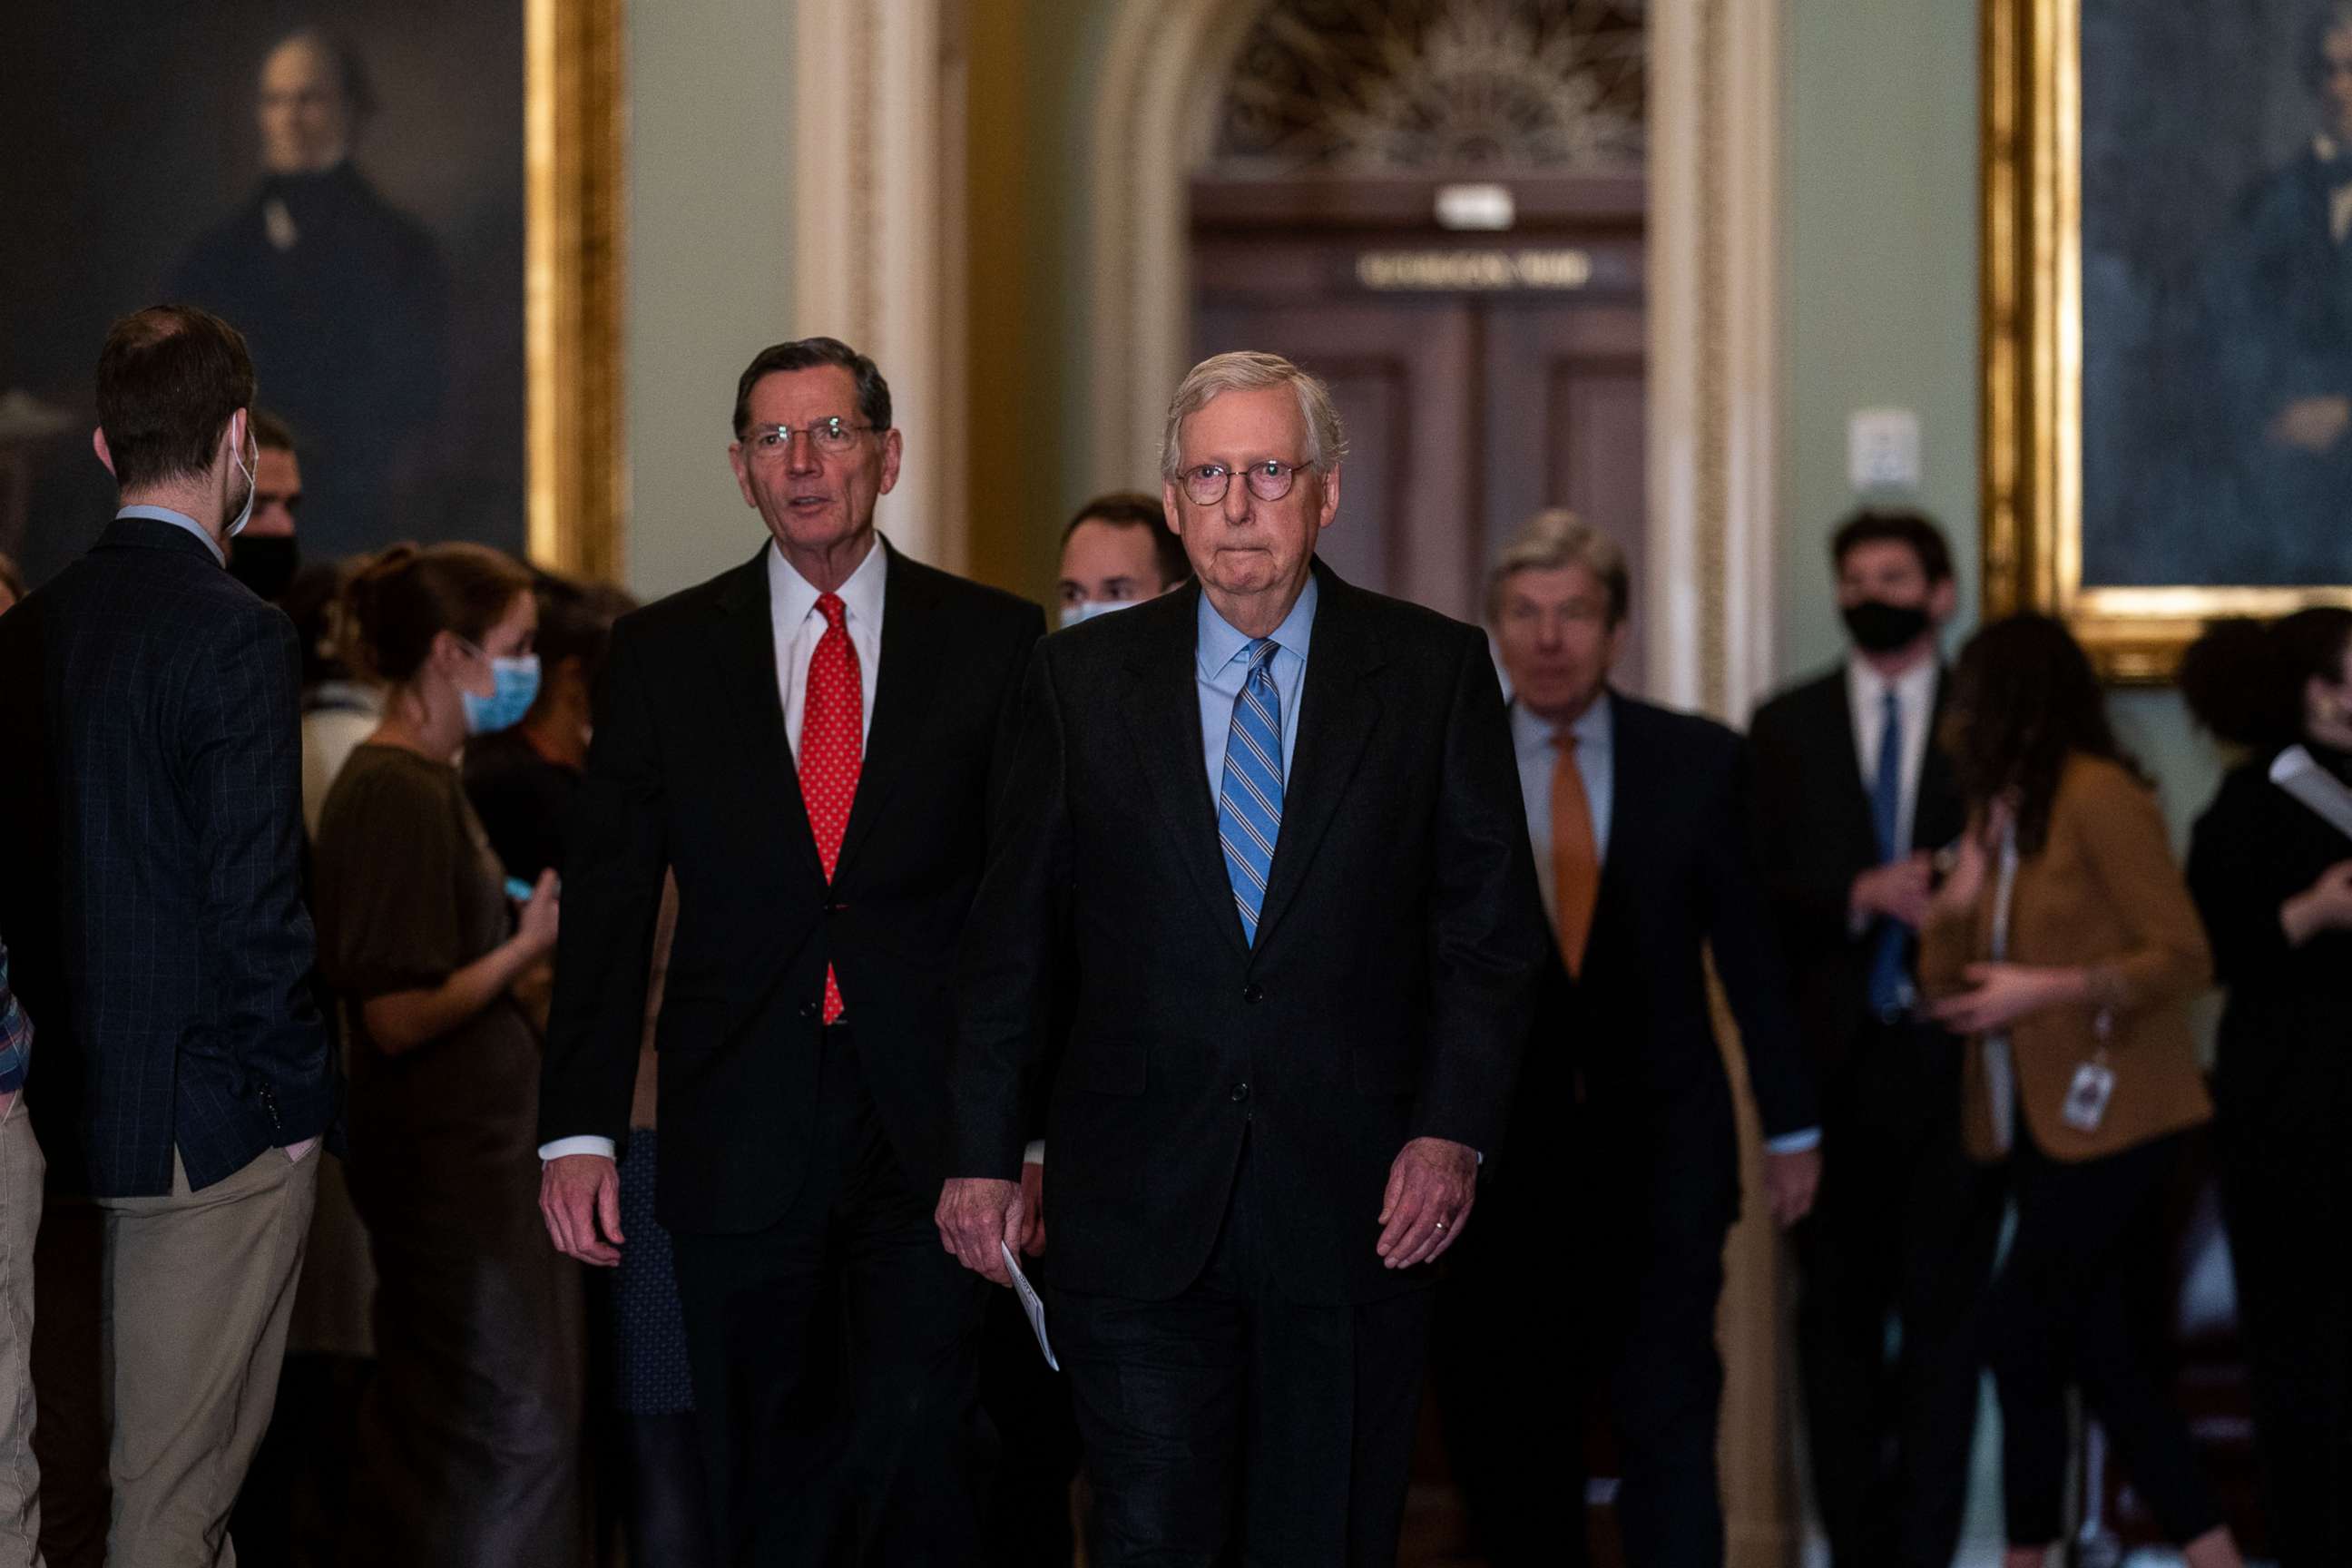 PHOTO: Senate Republican leadership, led by Senate Minority Leader Mitch McConnell, arrive for their weekly policy luncheon news conference outside the Senate Chamber on Nov. 30, 2021, in Washington, D.C.